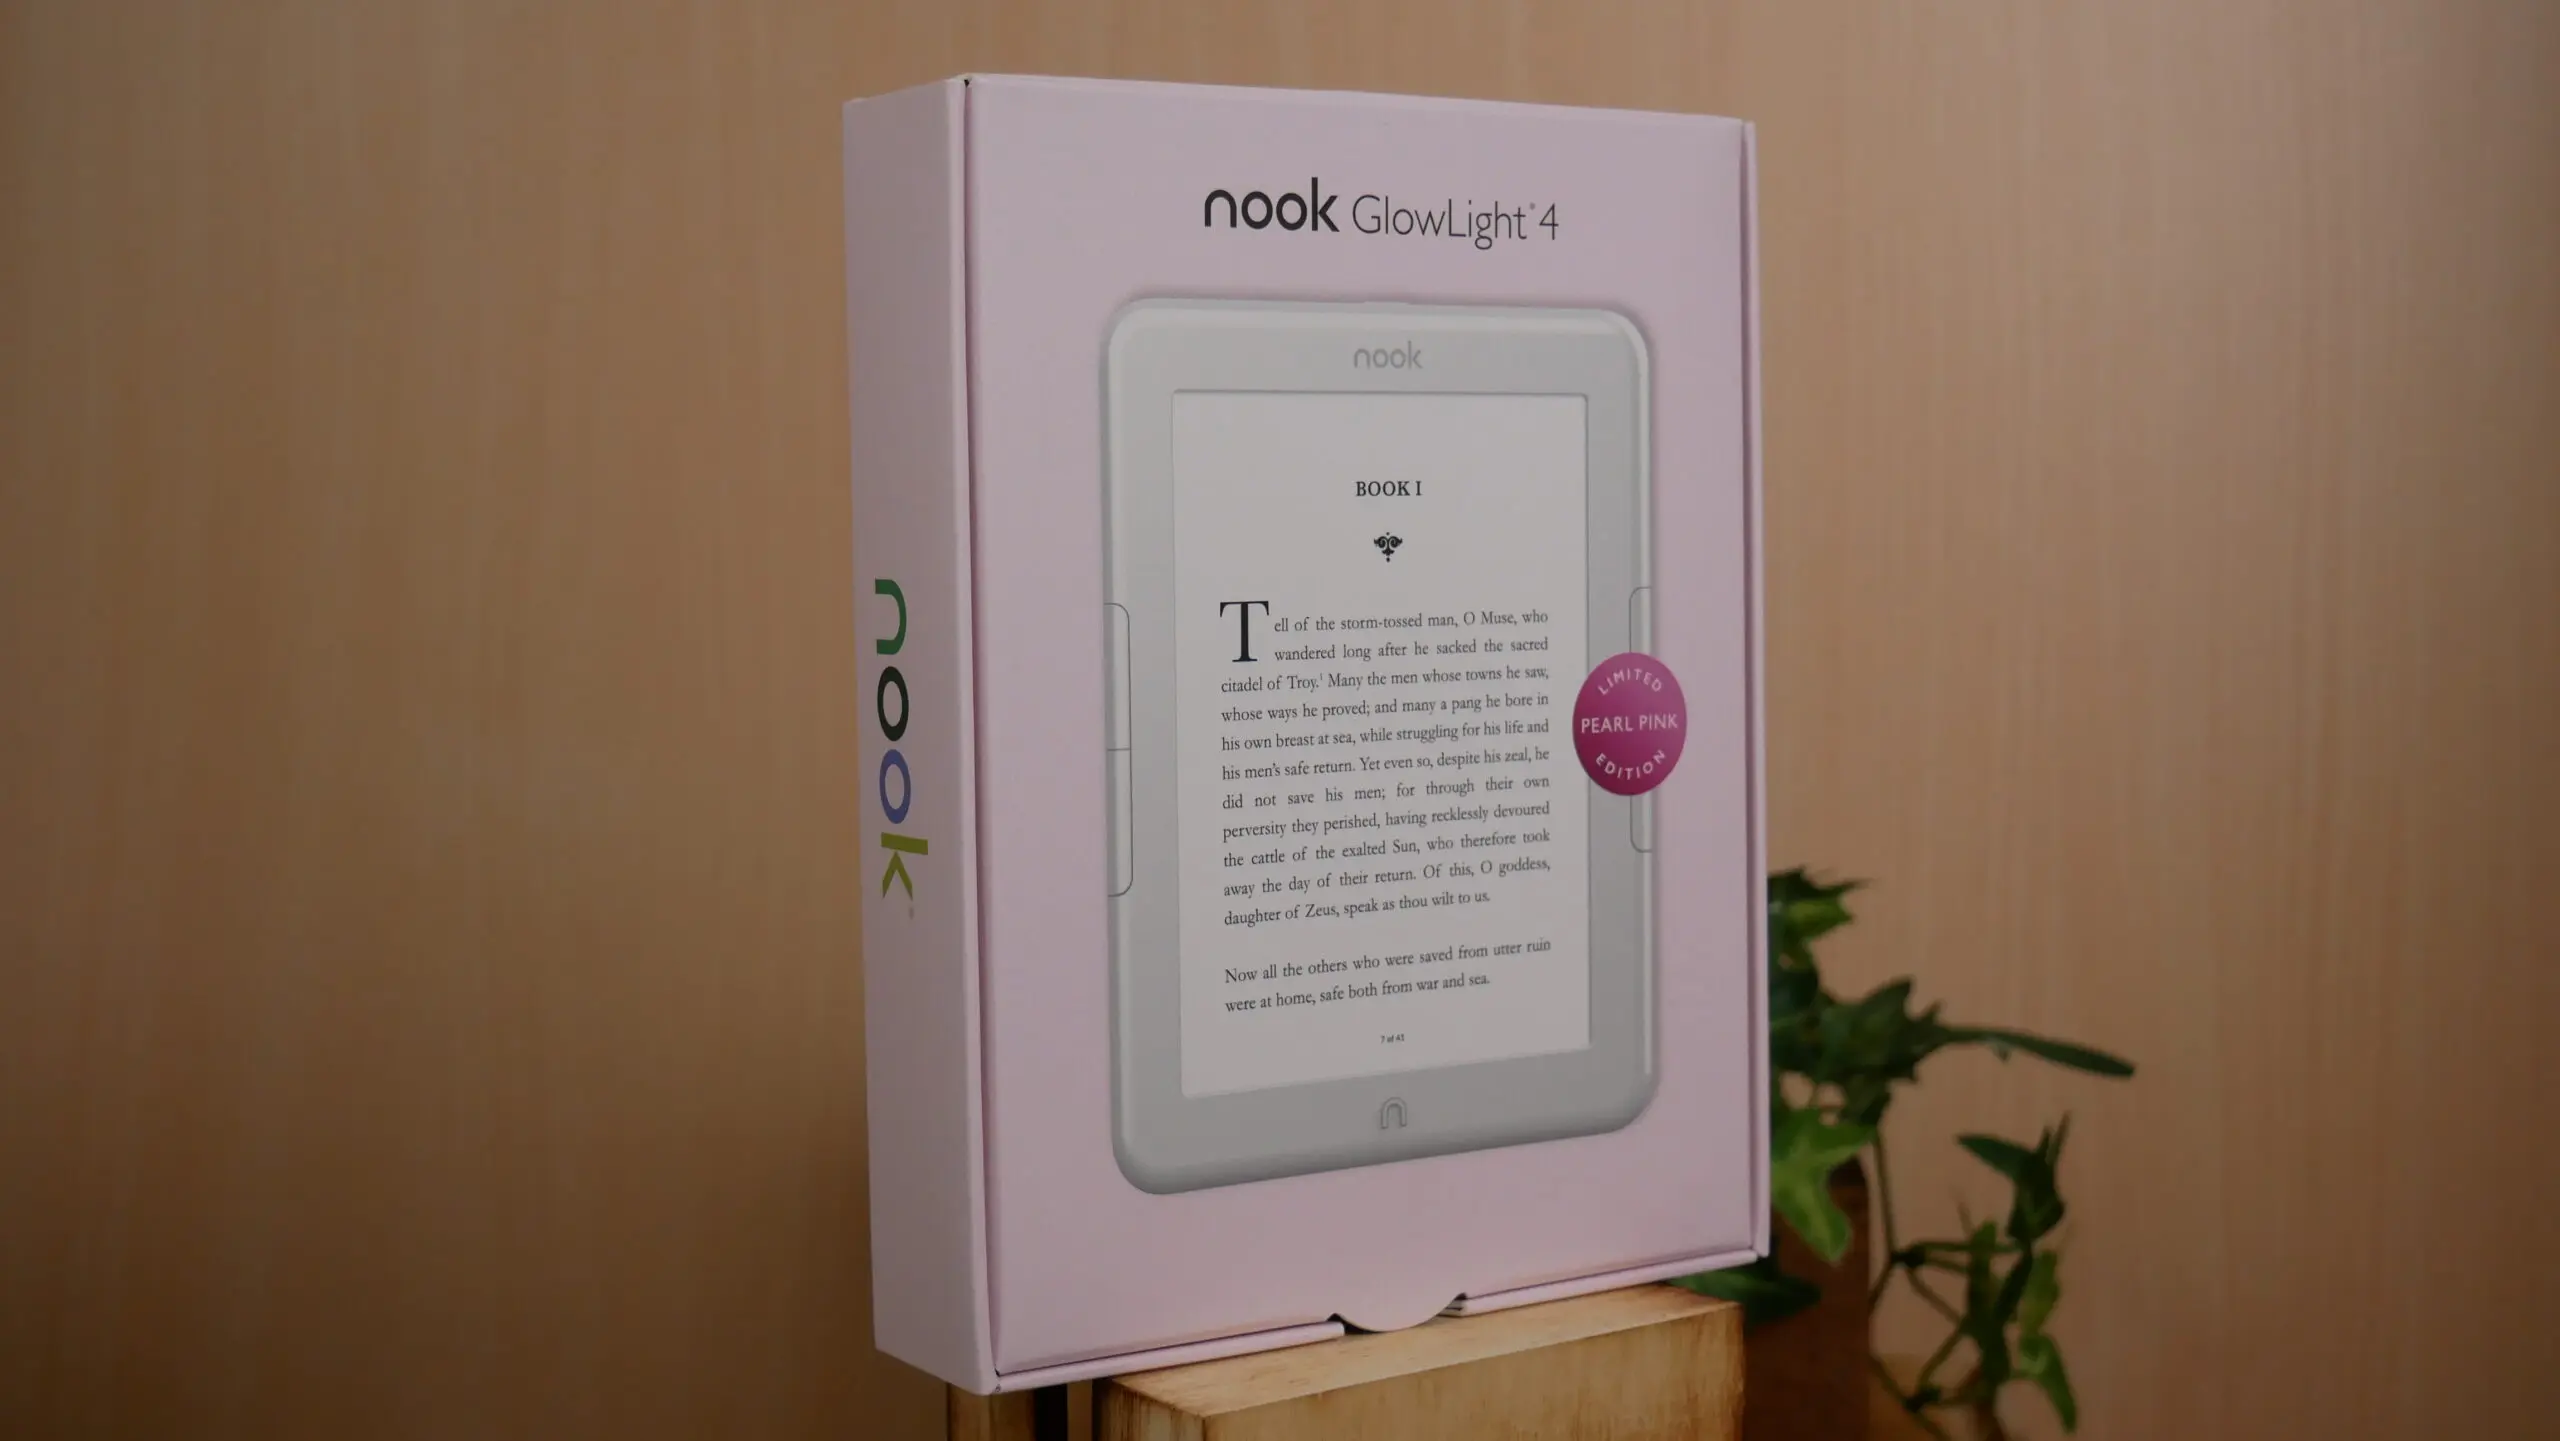 Barnes and Noble Nook Glowlight 4 with Pearl Pink Review